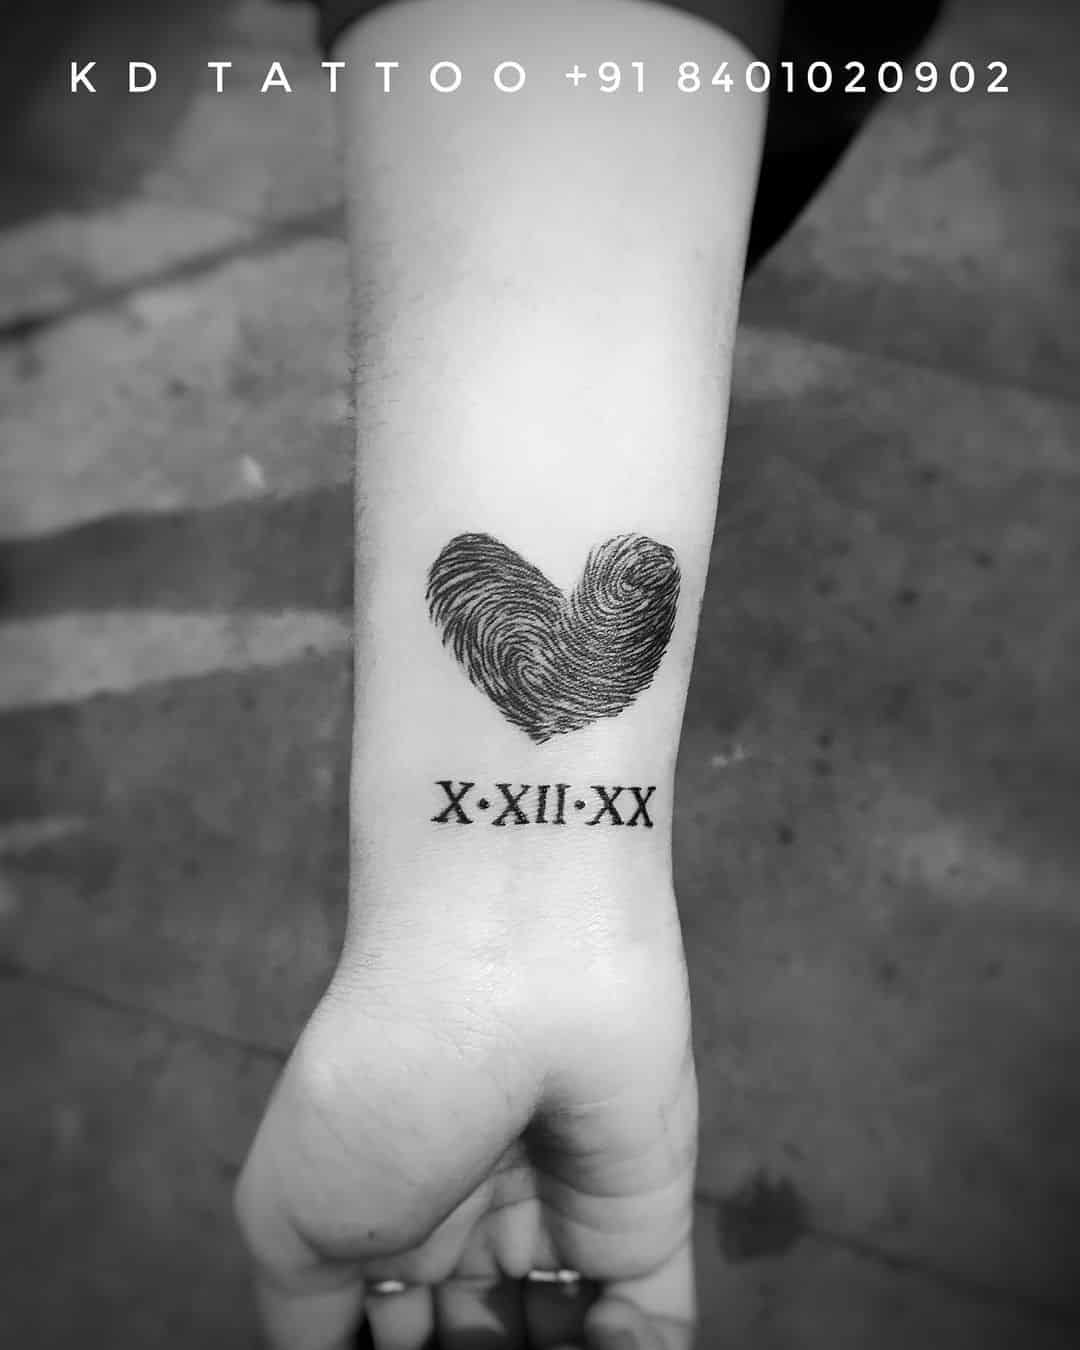 30 Best Wrist Tattoos to Make You Stand Out